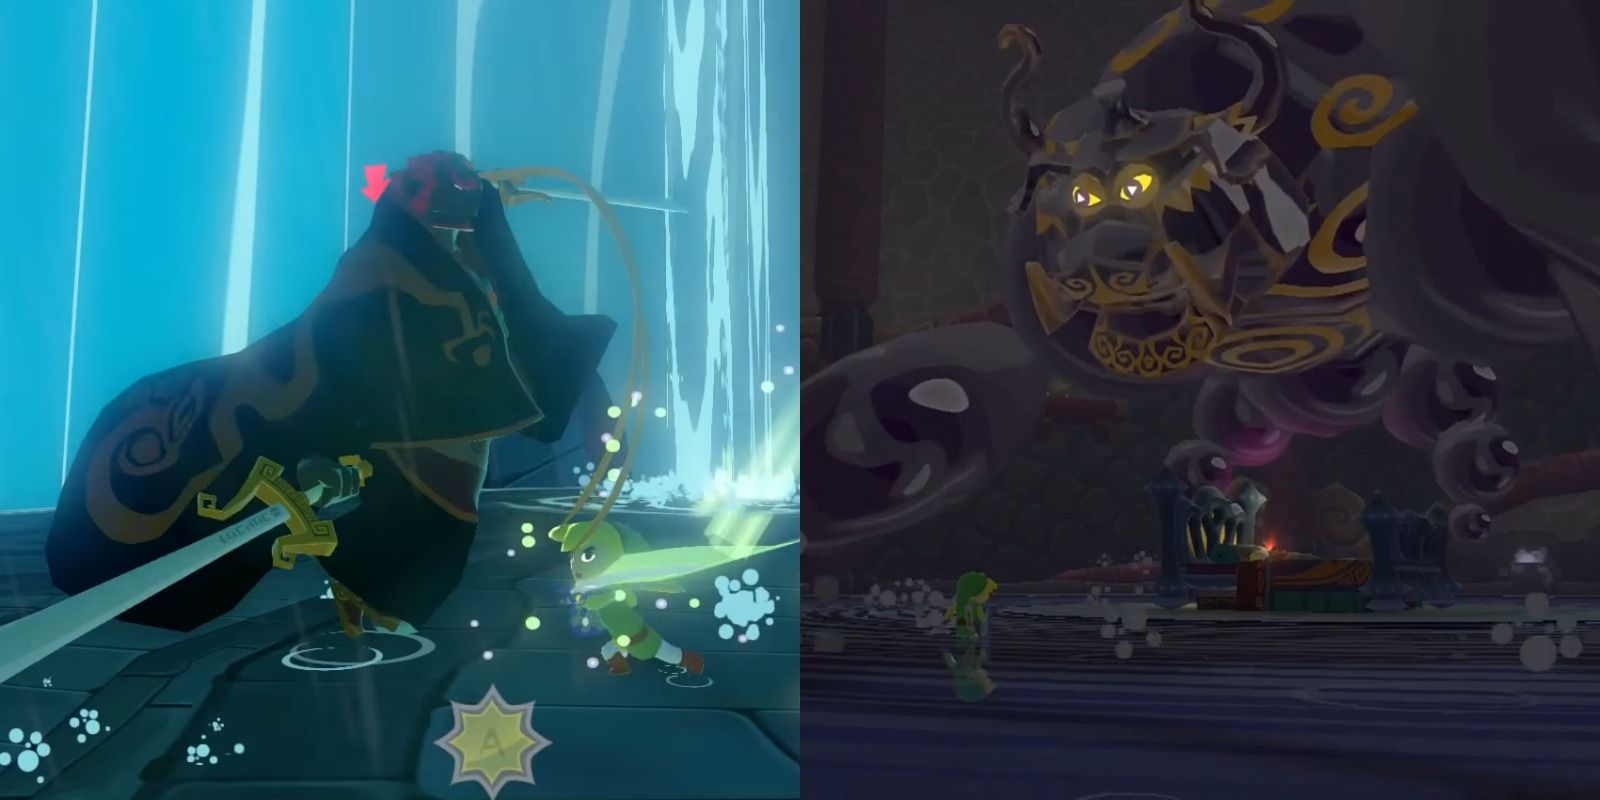 Side-by-side view of Link battling Ganondorf and Puppet Ganon in The Legend Of Zelda The Wind Waker